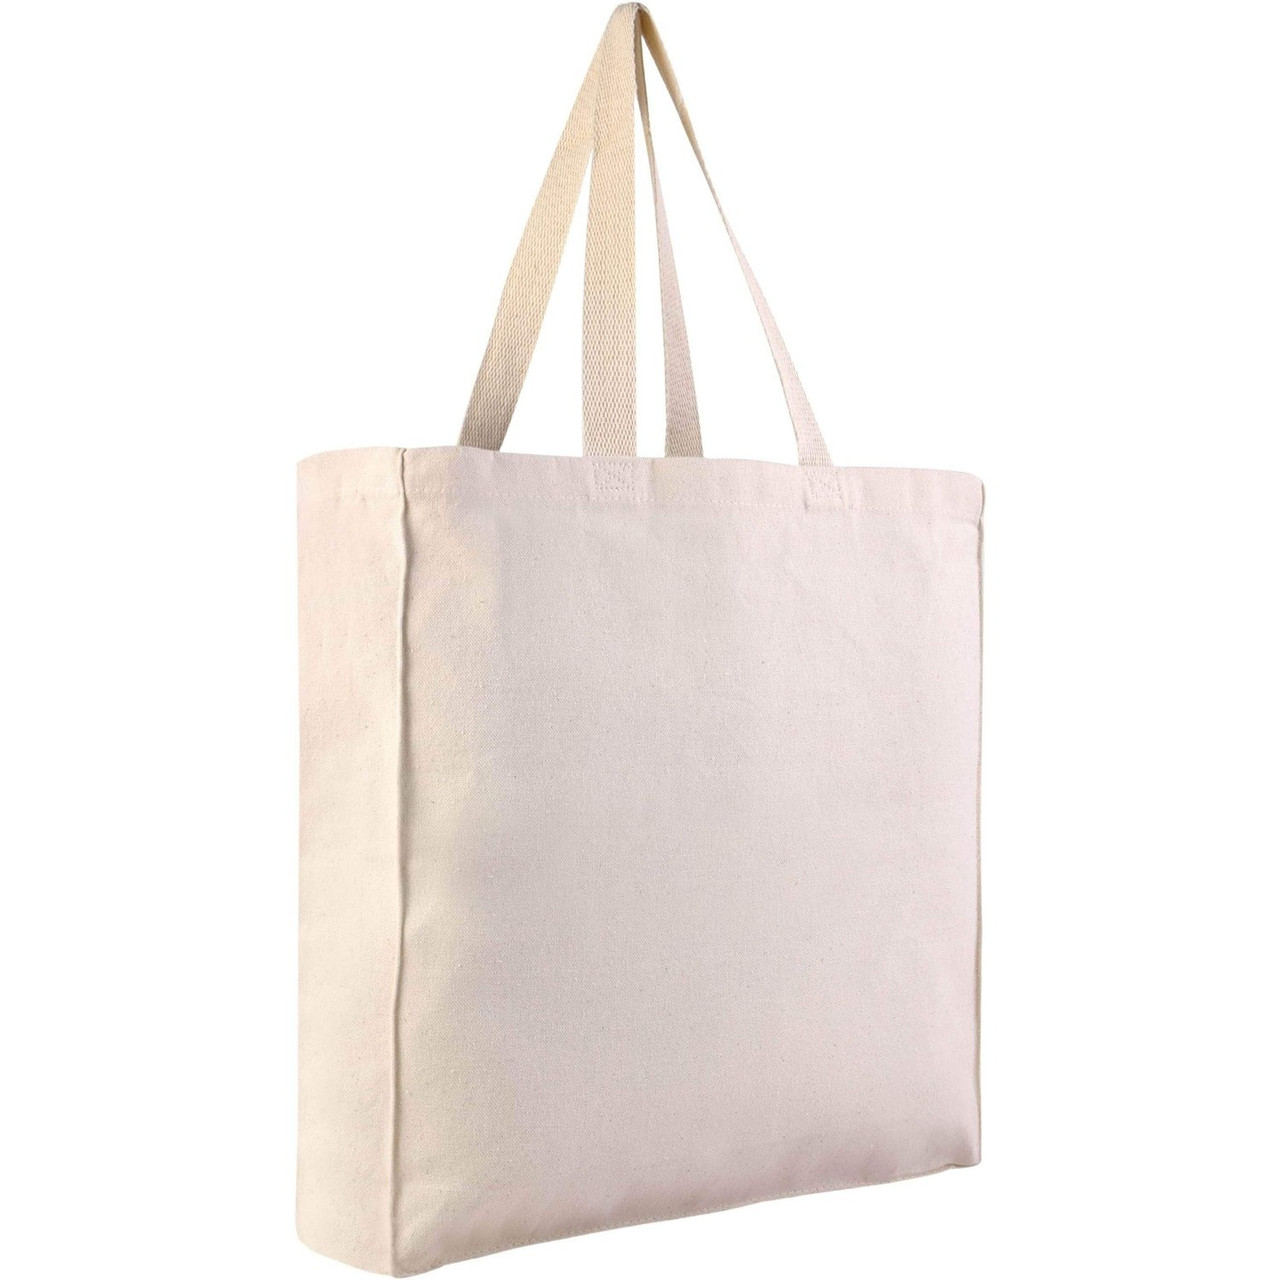 Organic Cotton Bags - Heavy Canvas Tote Bags w/ Bottom Gusset